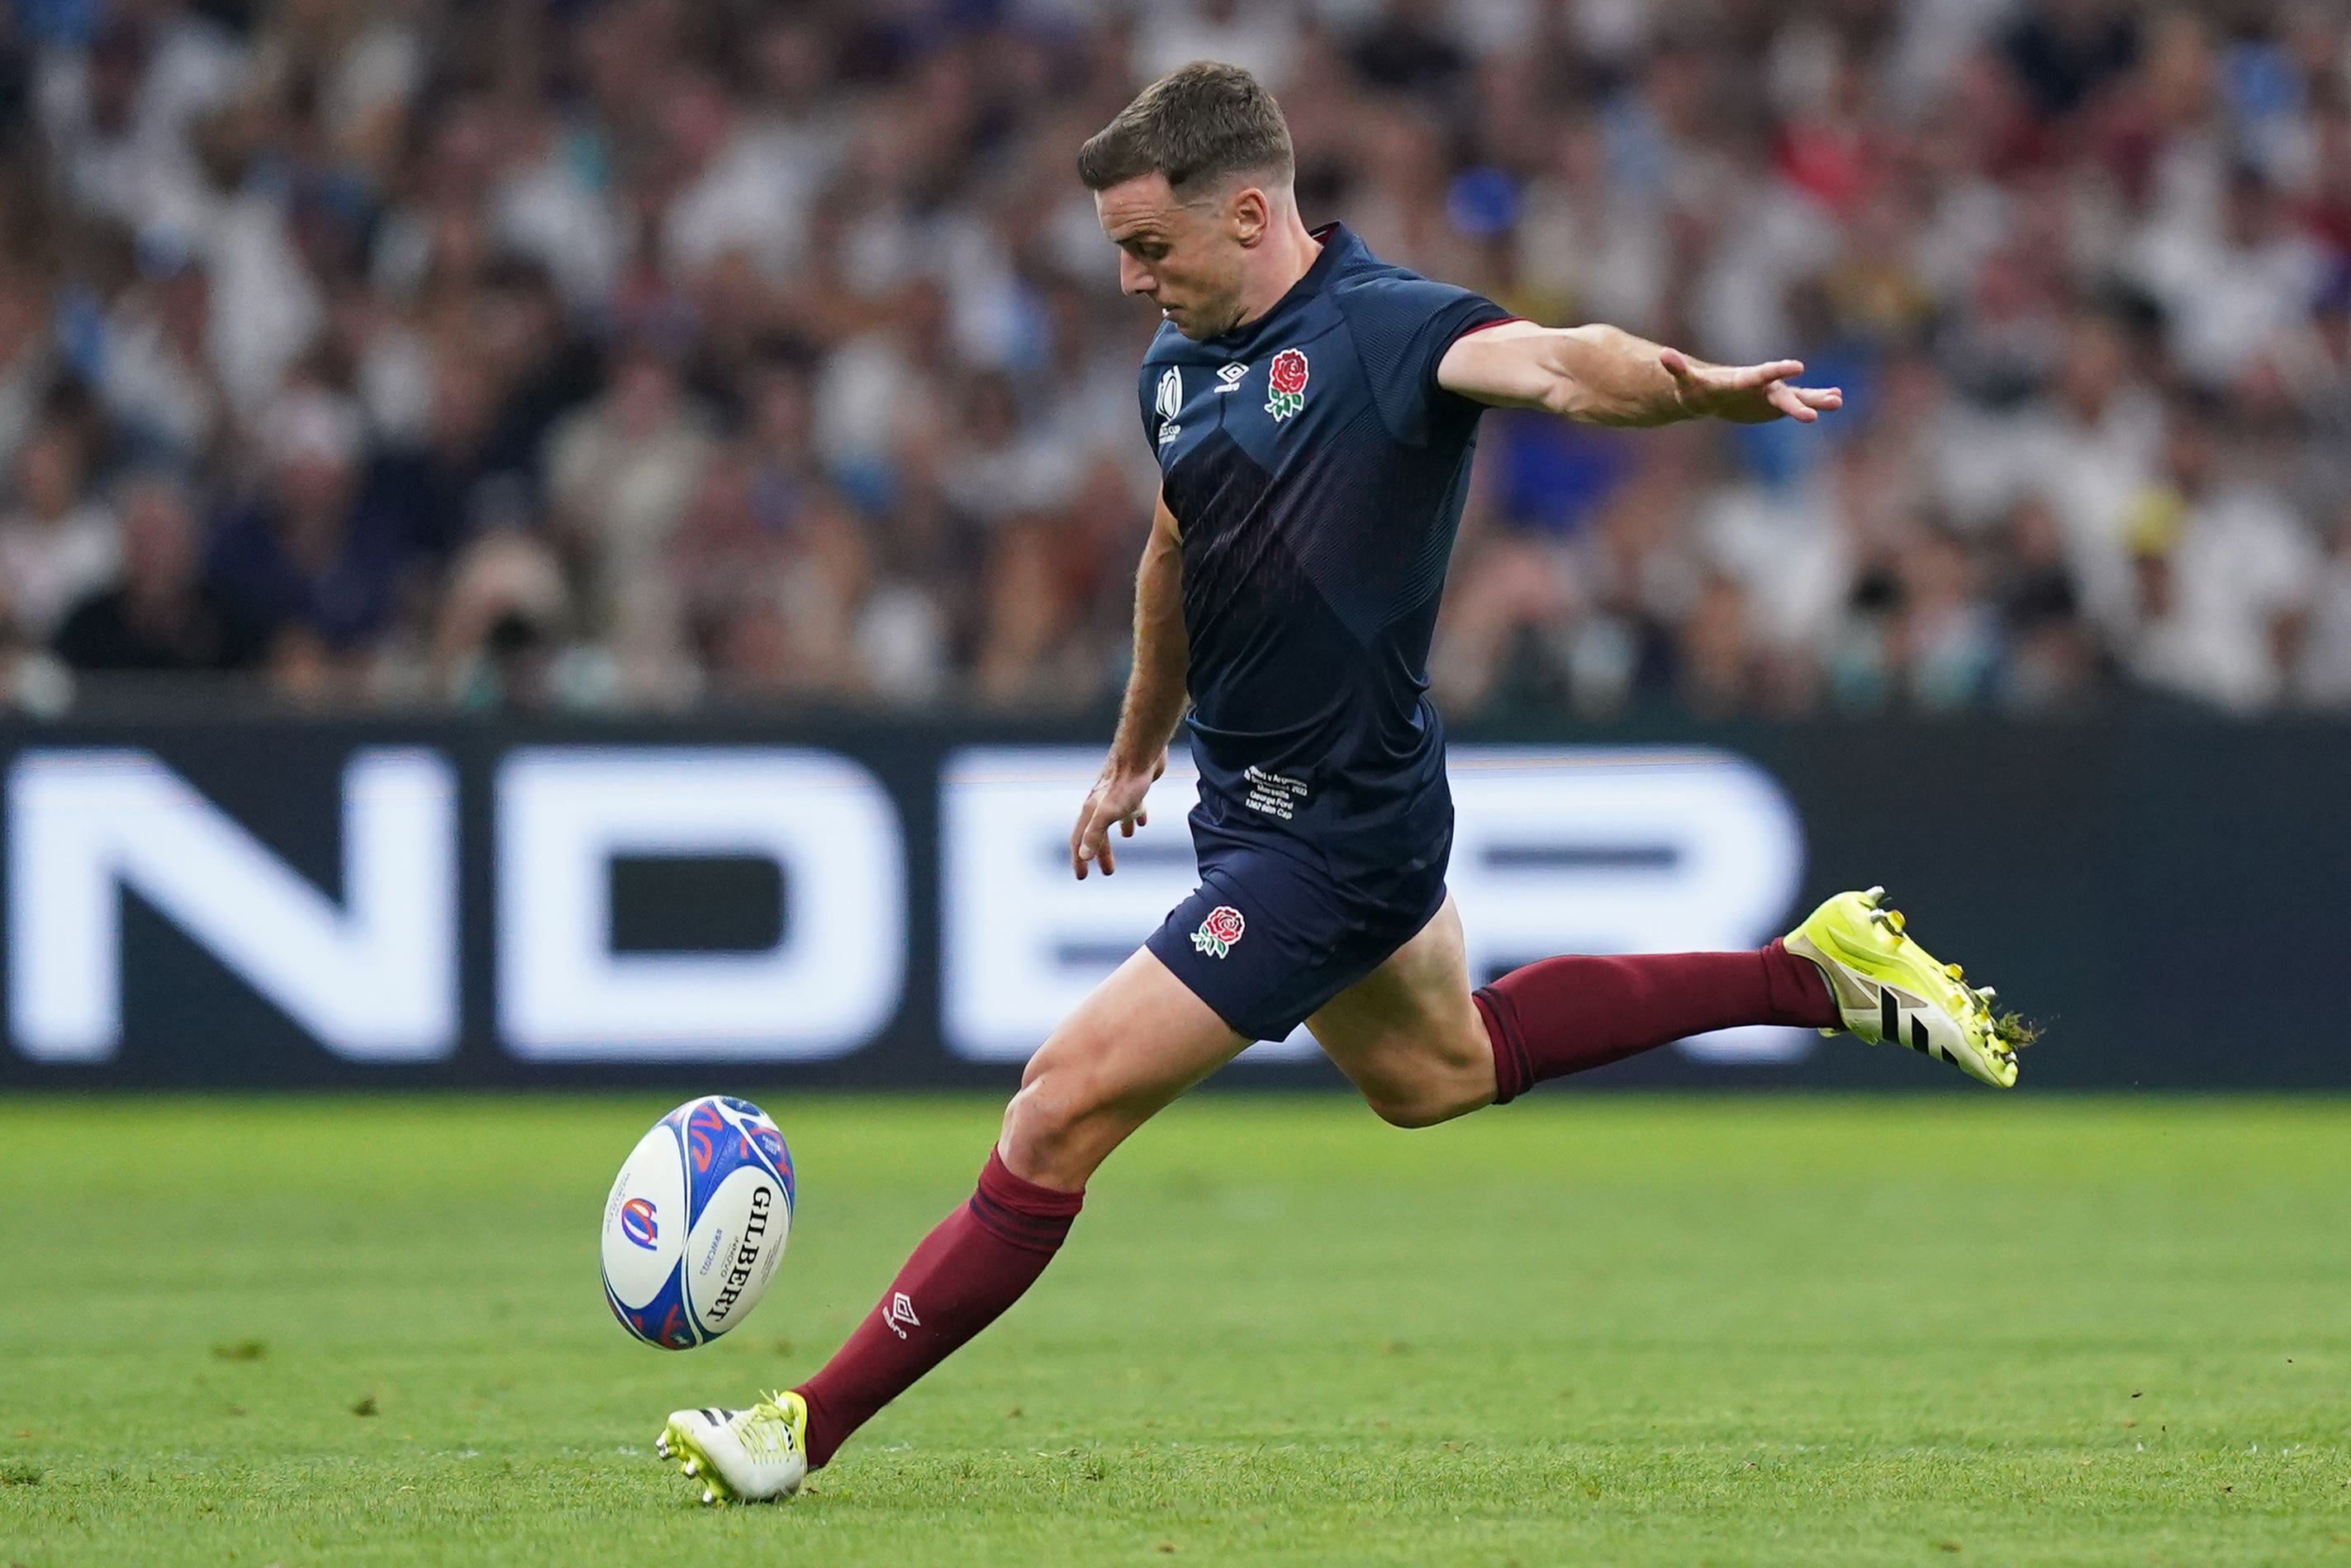 George Ford will start for England against Italy